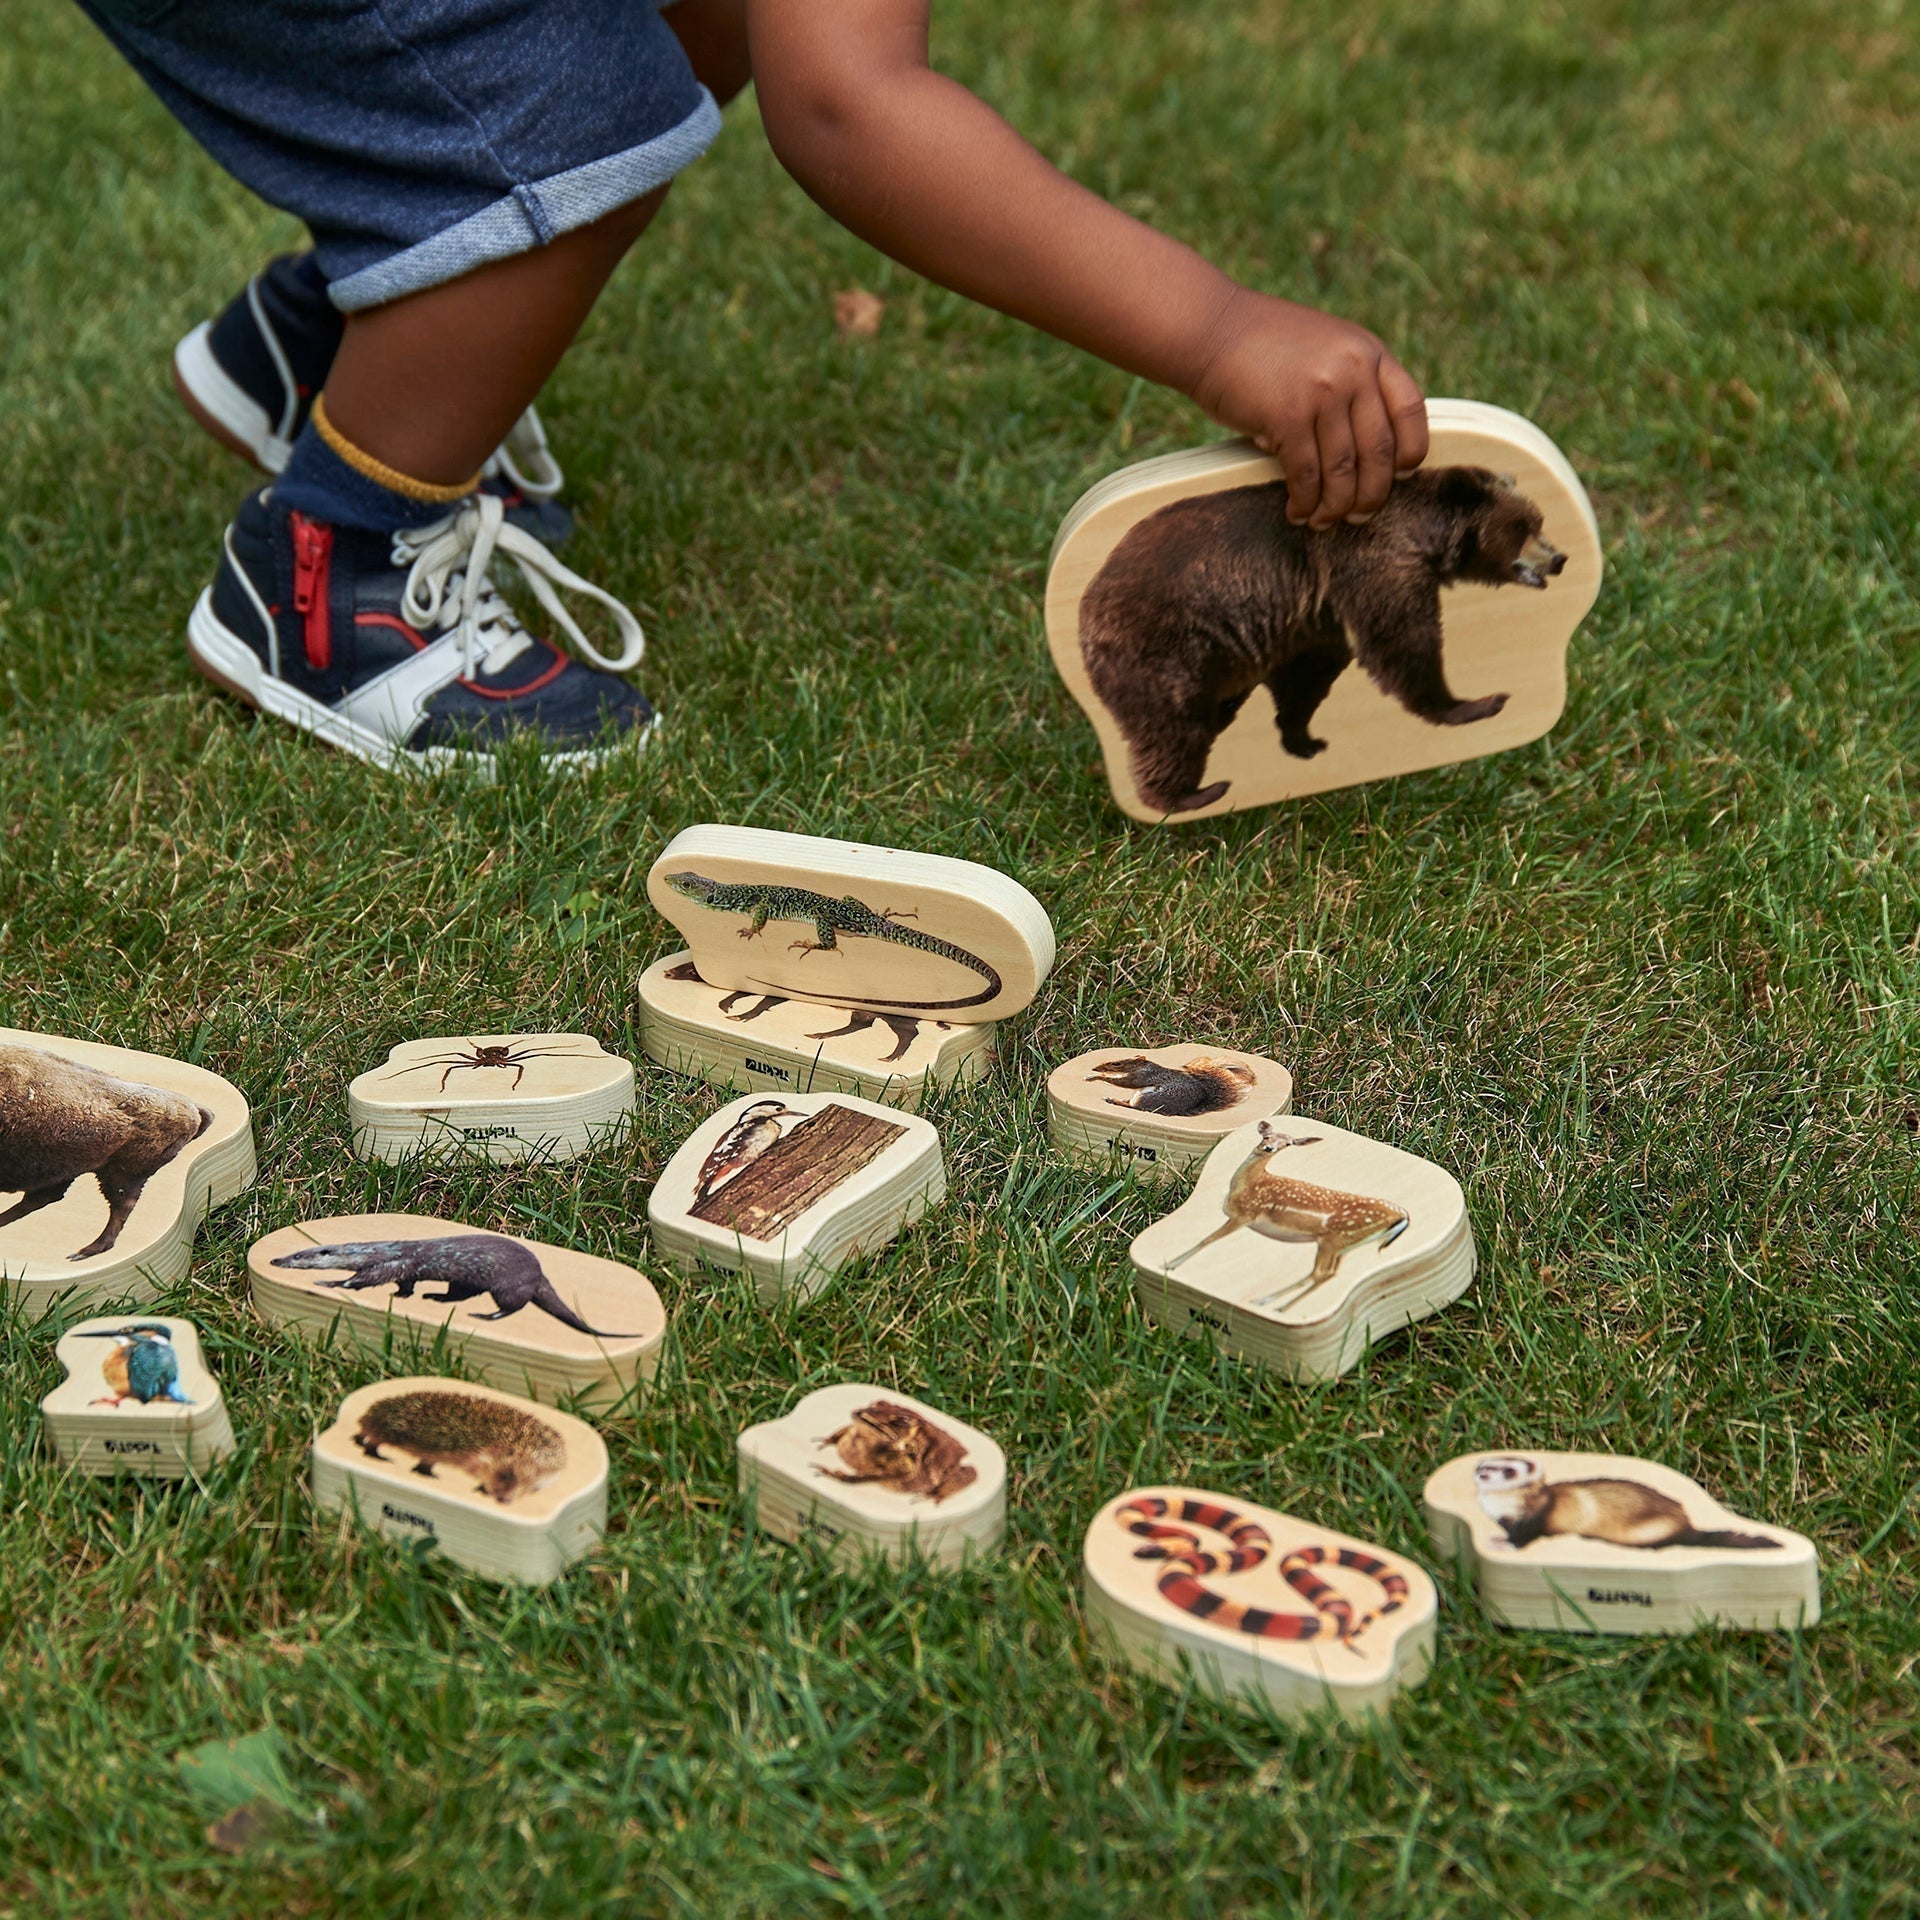 TickiT Wooden Forest Animal Blocks, Our TickiT® Wooden Forest Animal Blocks are a great way for your child to discover wild animals up close as the chunky wooden picture blocks are colour printed on both sides with real photographic images of wild animals from forest, river and woodland environments.The realistic imagery will enable your child to learn about animals in the wild and inspire them to identify them when out on trips to a safari park or see them in books. Older children can be encouraged to visu